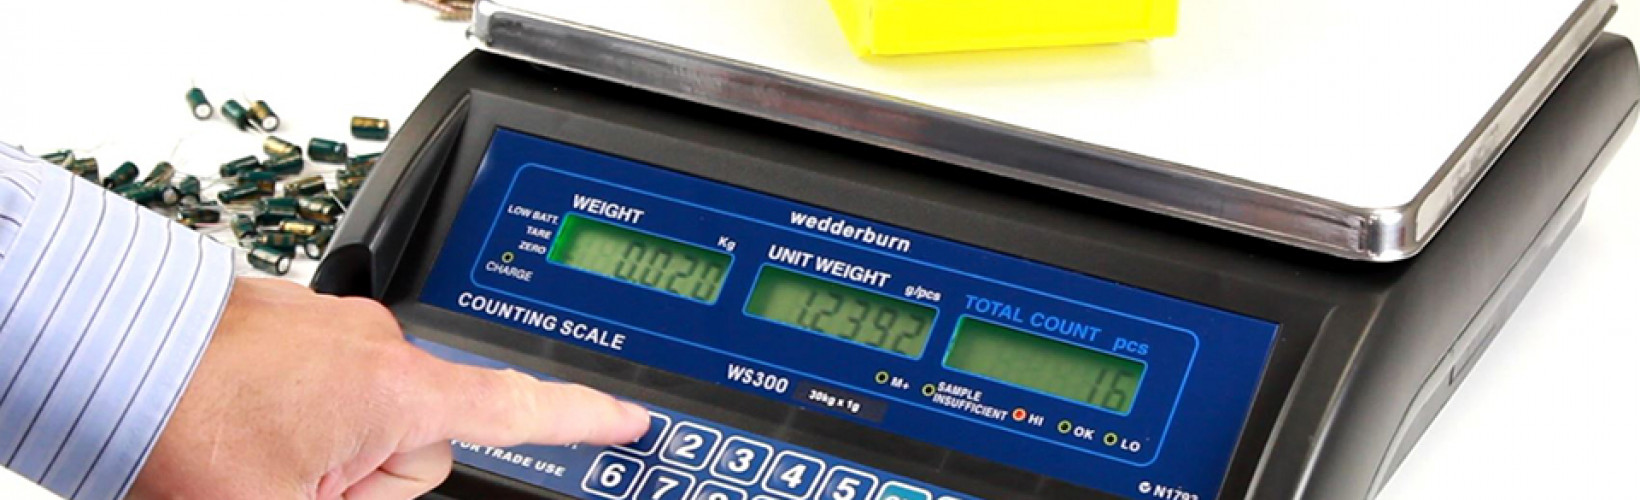 Stocktake Counting Scale Video